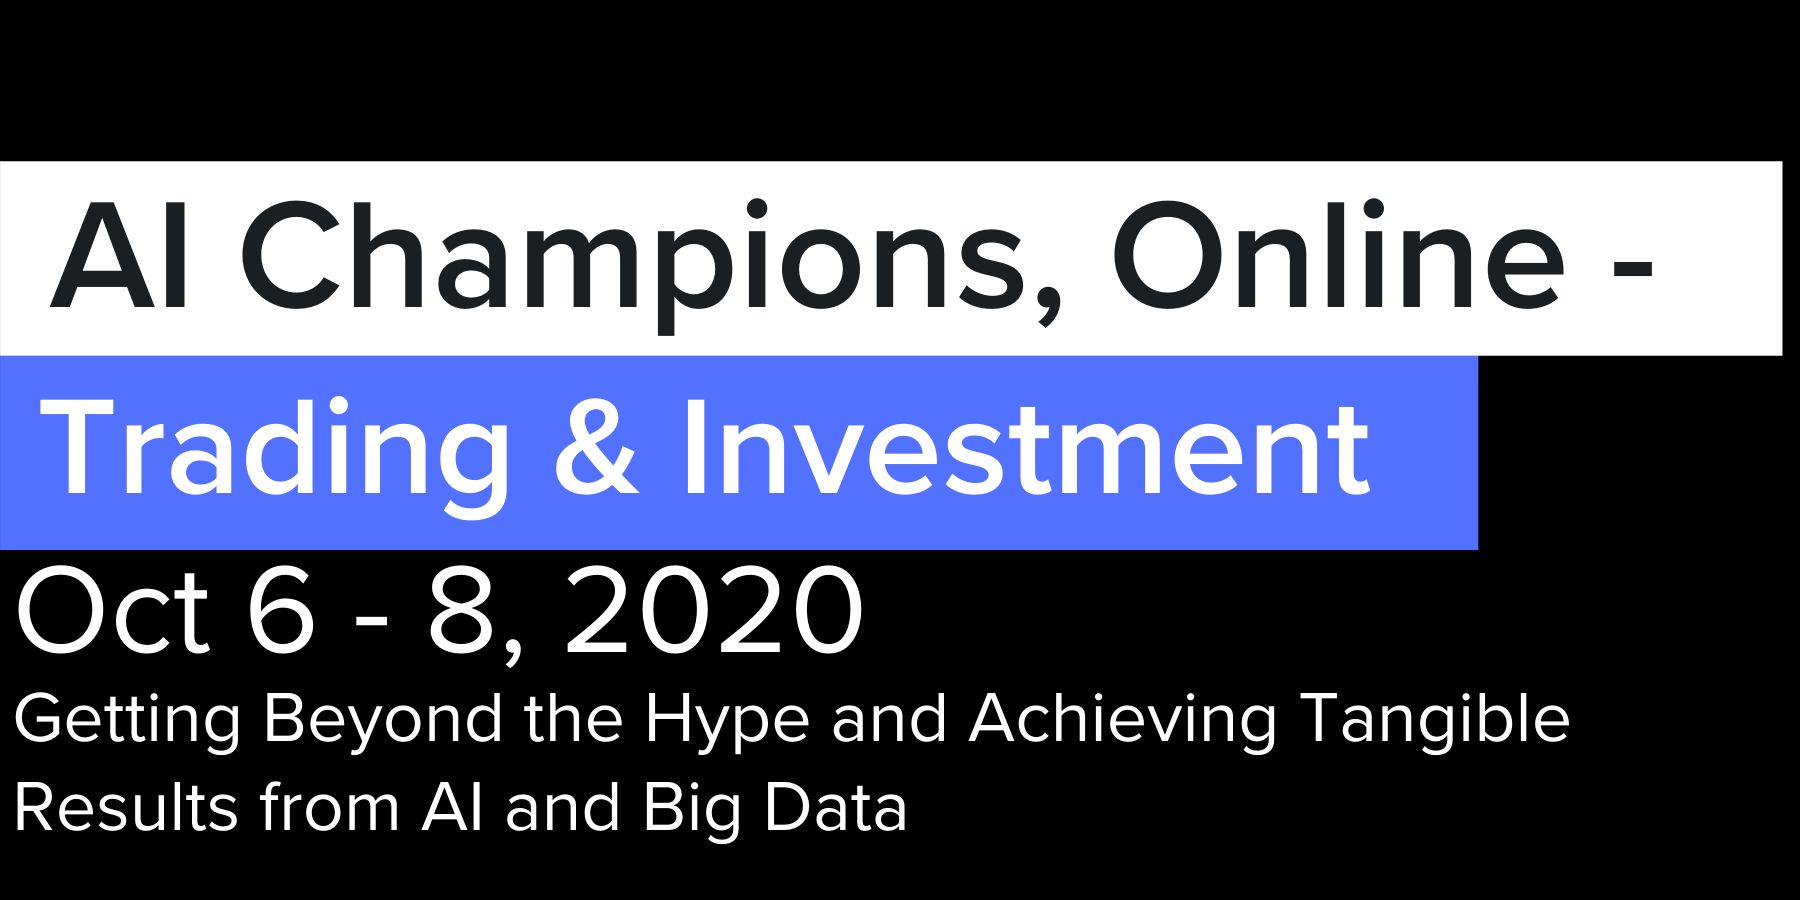 AI Champions, Online - Trading and Investment